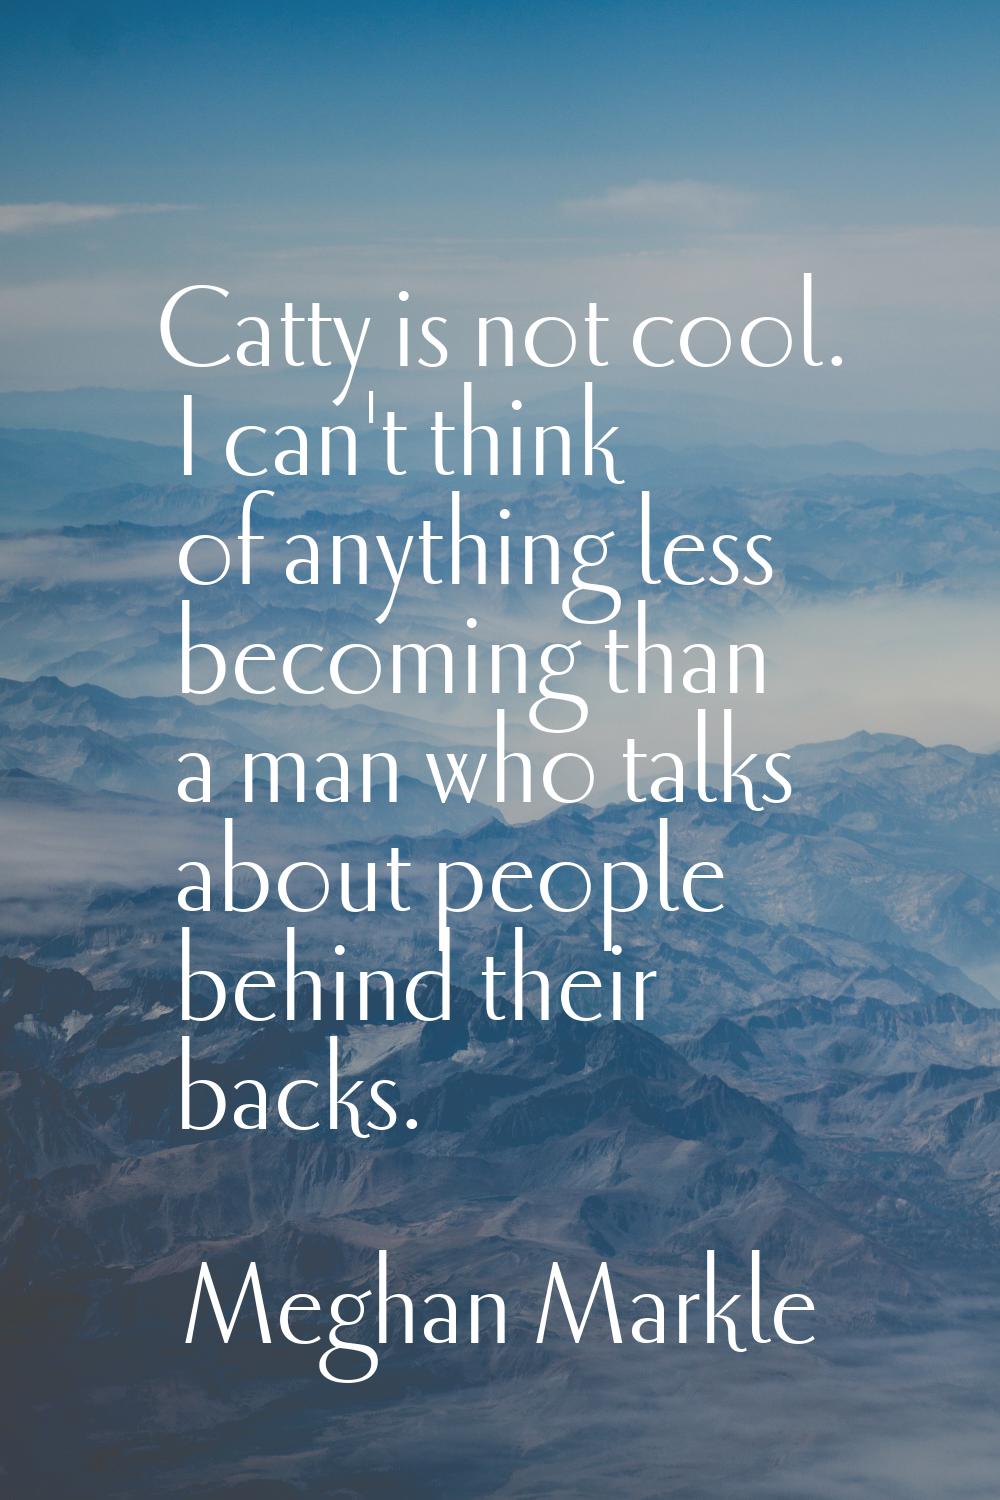 Catty is not cool. I can't think of anything less becoming than a man who talks about people behind